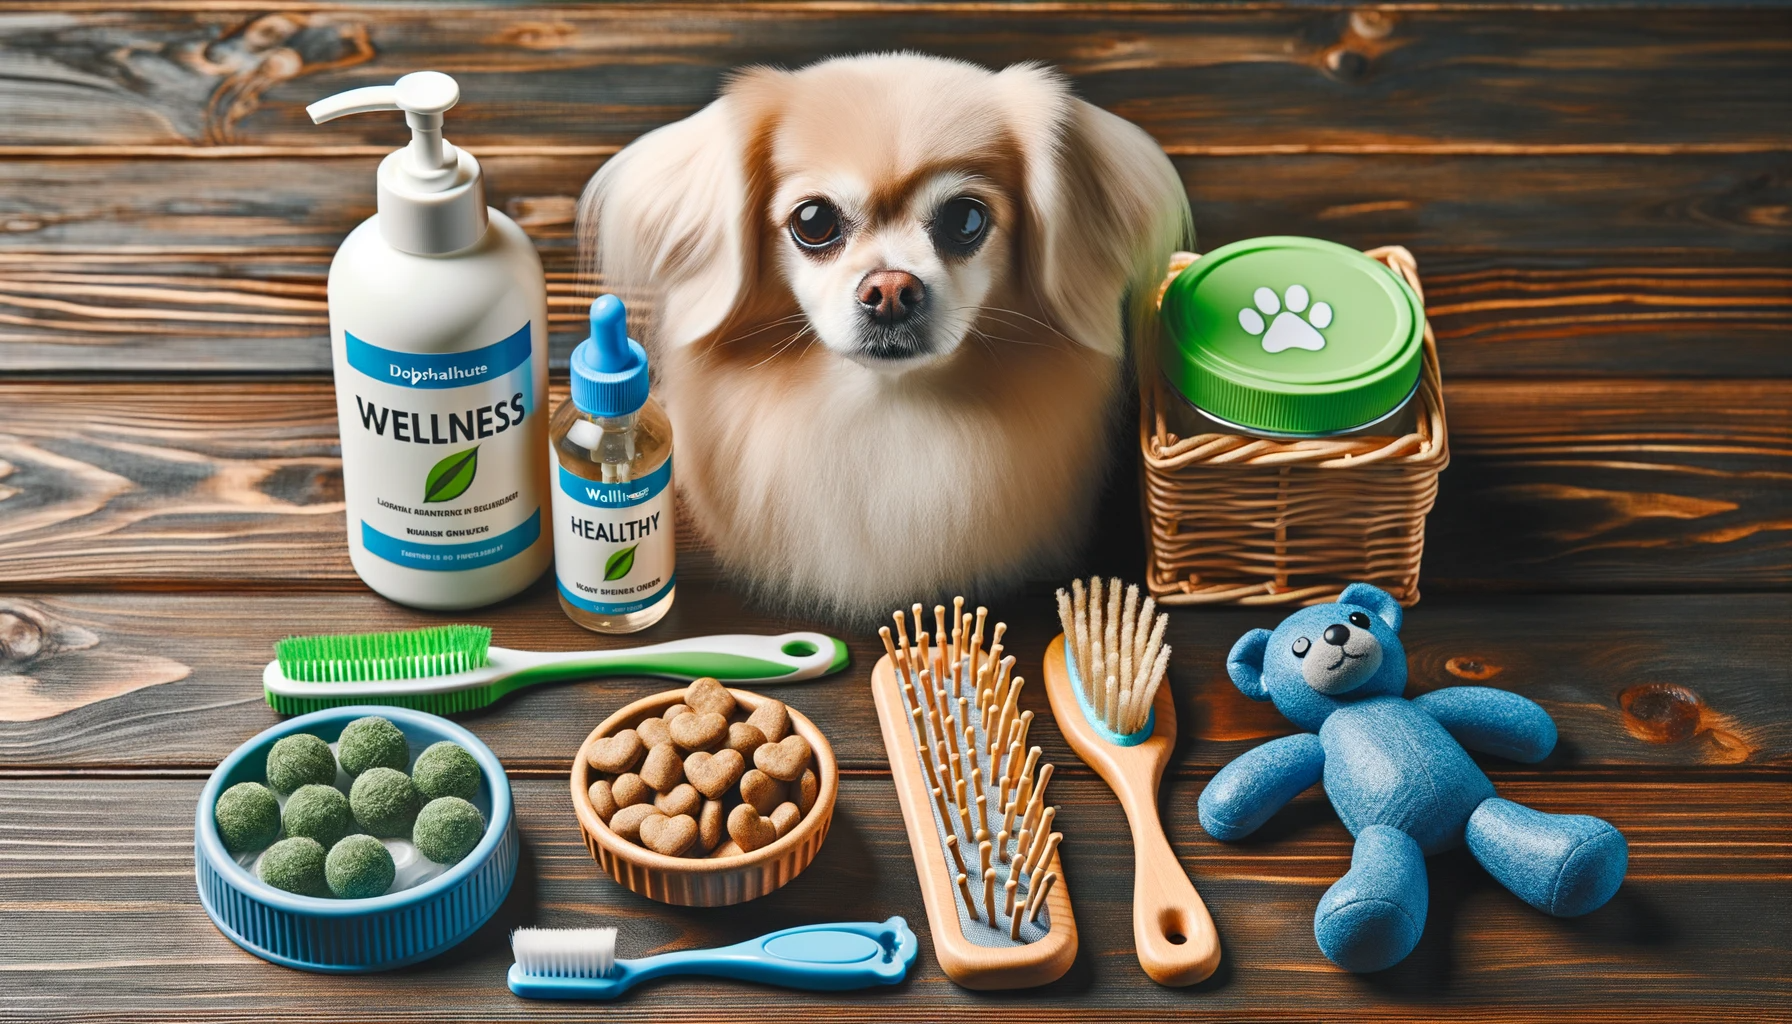 An assortment of Labrahuahua care items including toys, grooming tools, and nutrient-rich foods